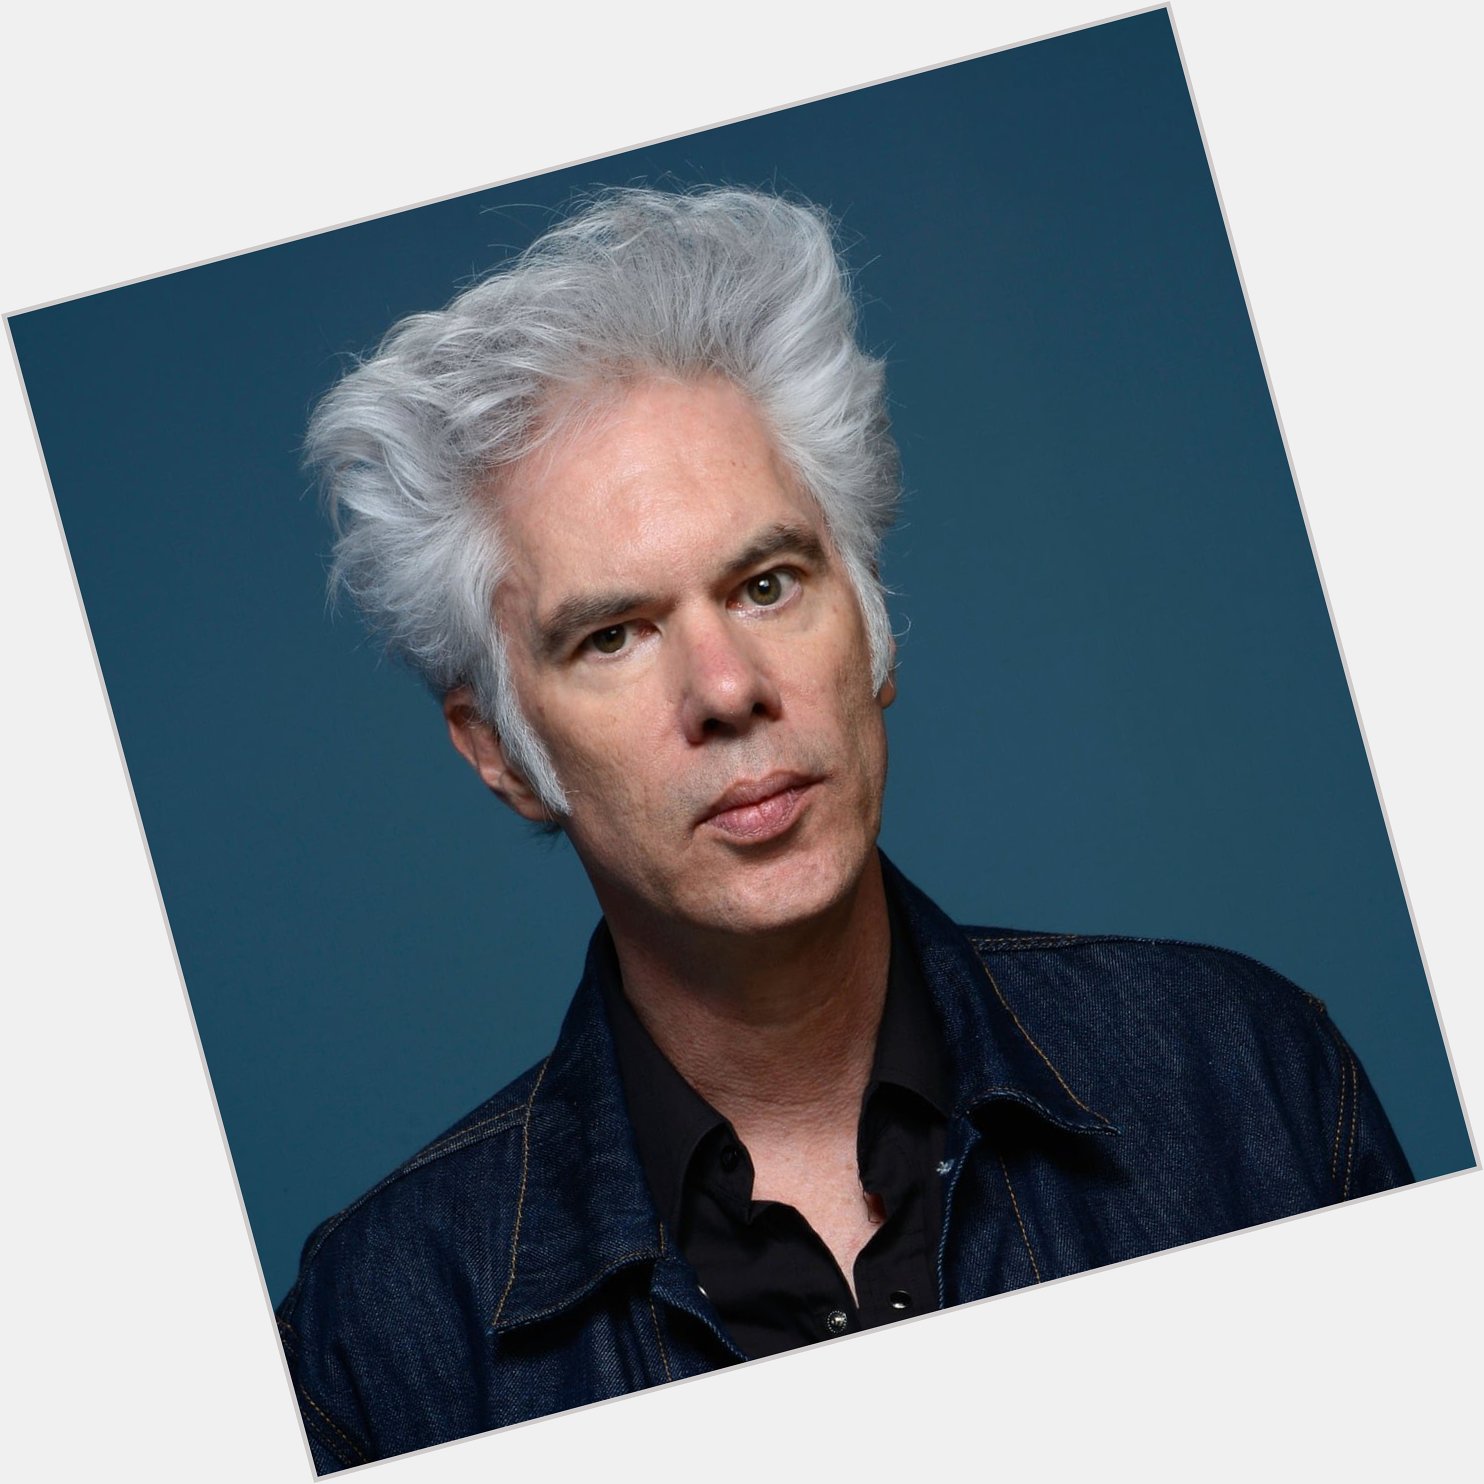 Happy birthday to Jim Jarmusch, one of my favorite directors and also my hair goals when I am his age. 